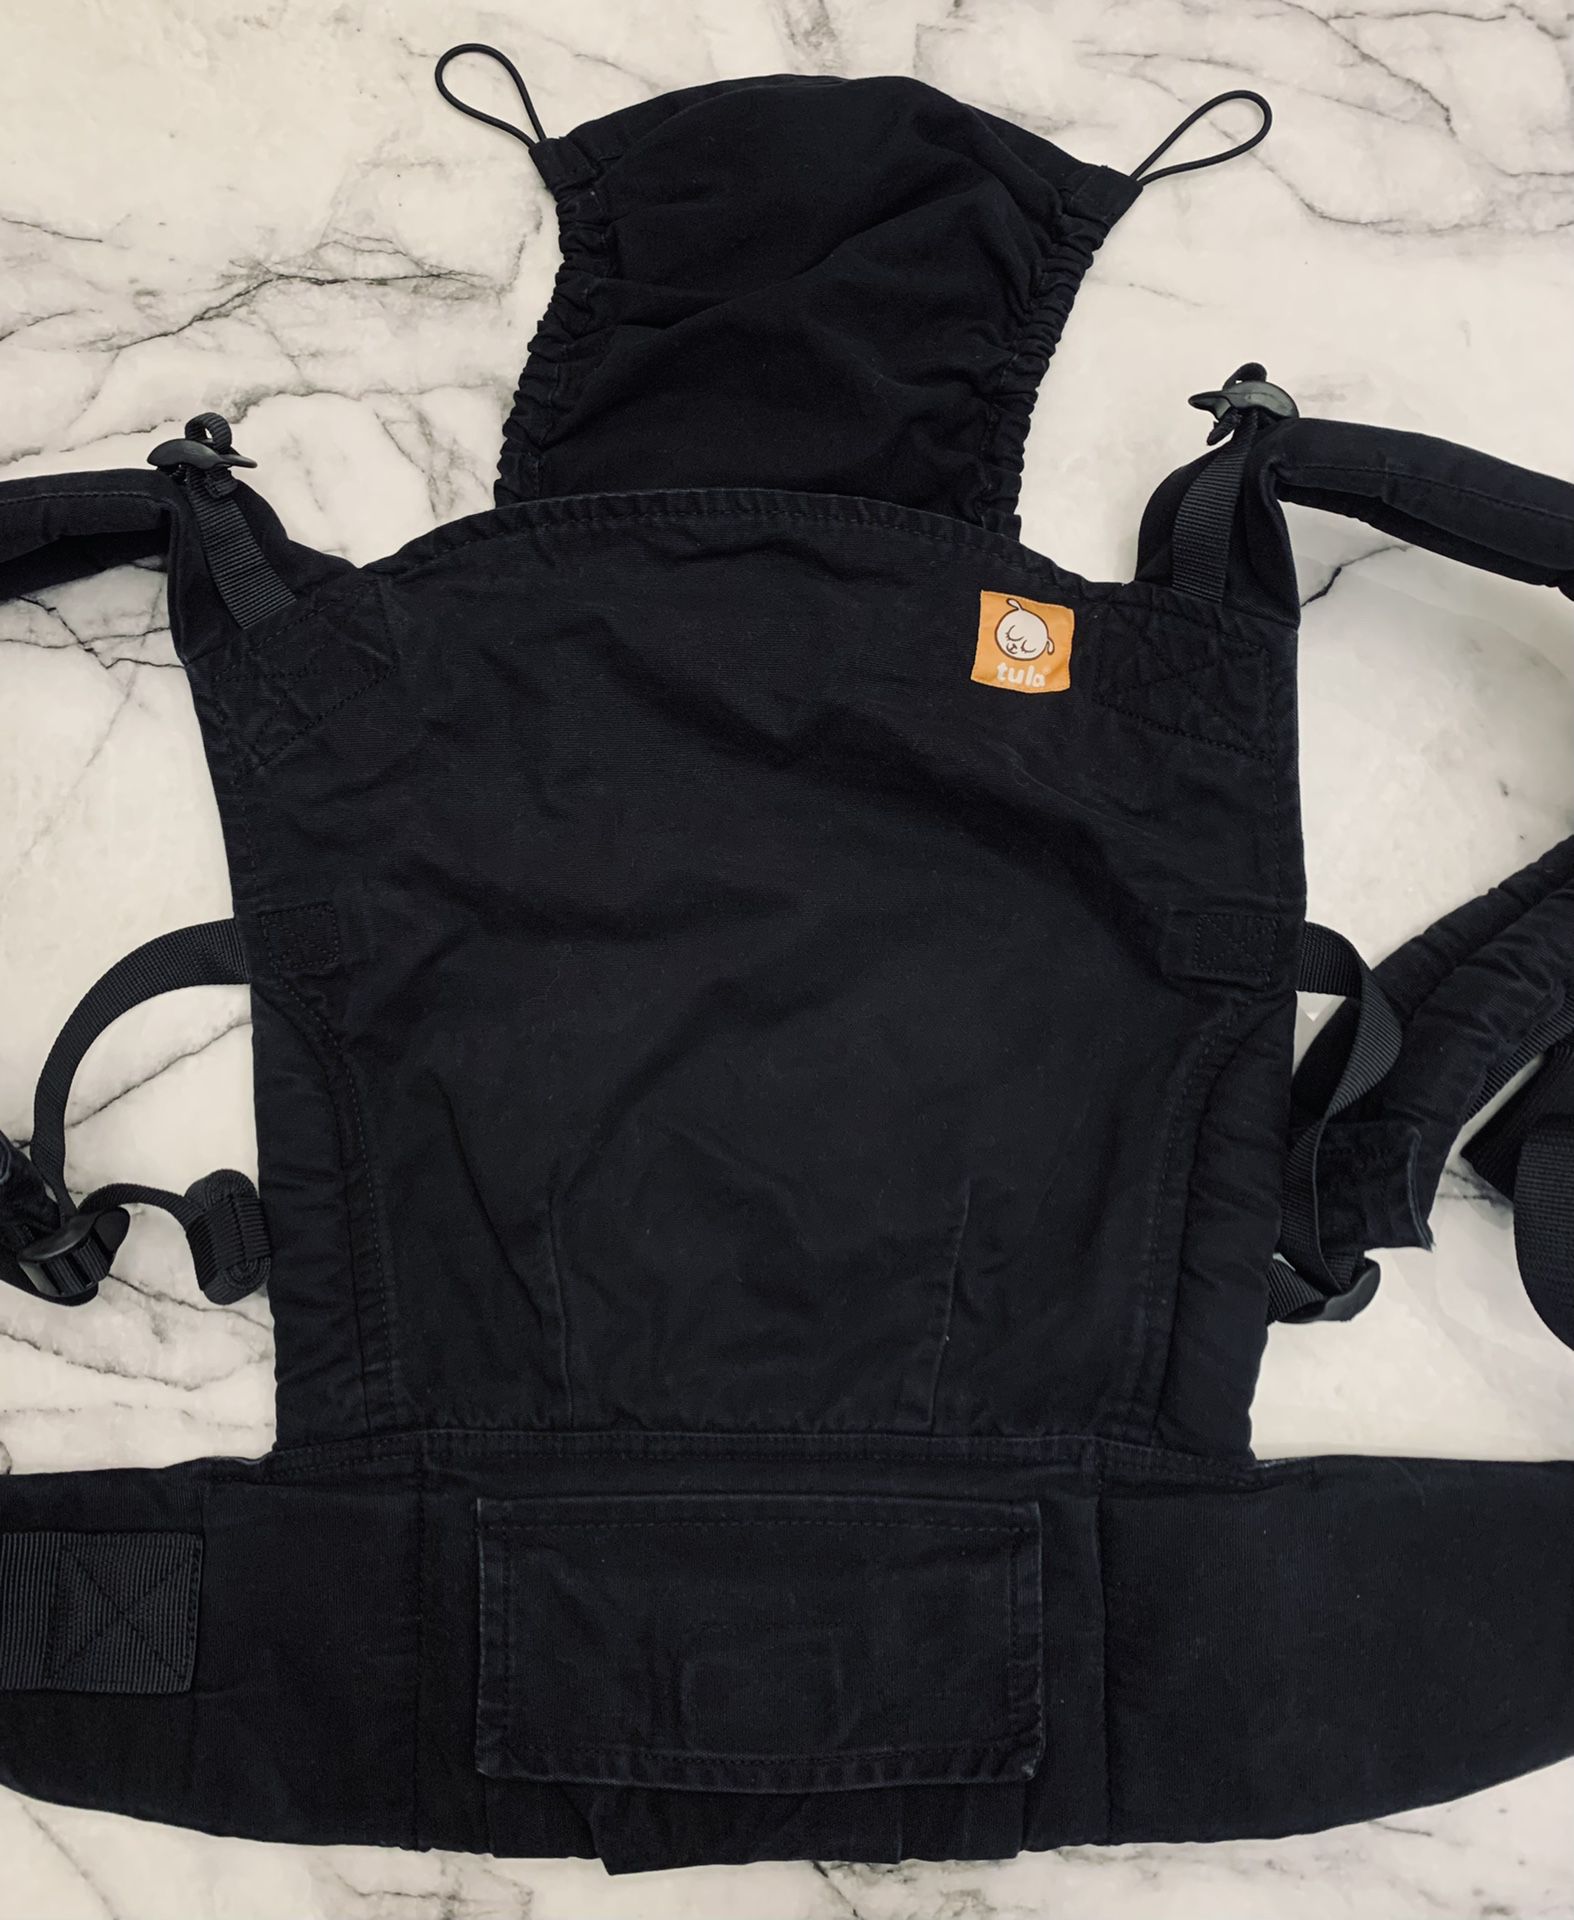 Black Tula Baby Carrier